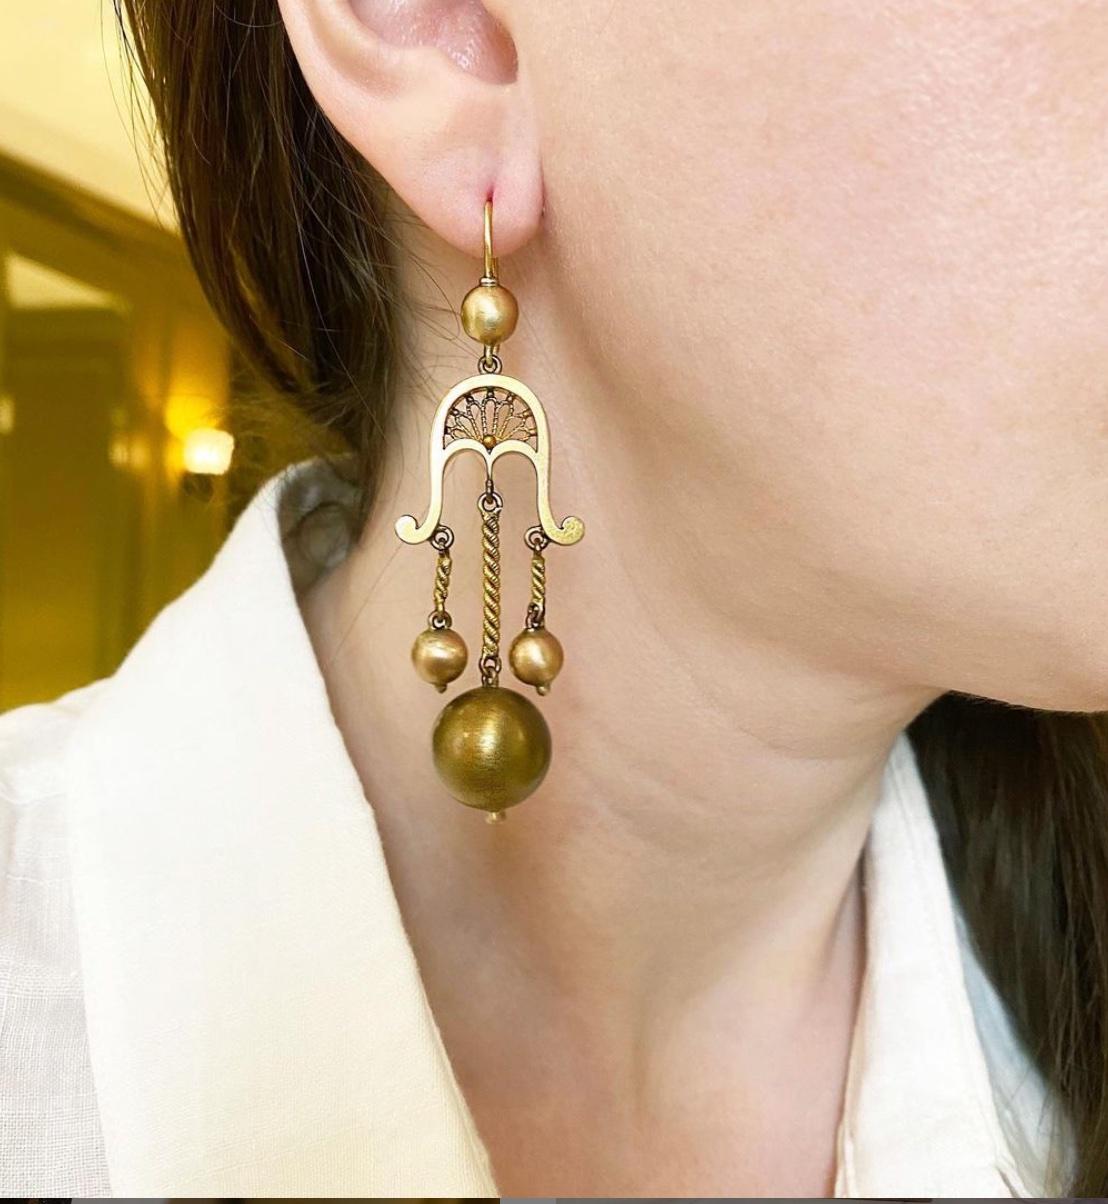 Antique Gold Girandole Style Earrings with Open Scrollwork and Ball Pendants In Good Condition For Sale In New York, NY